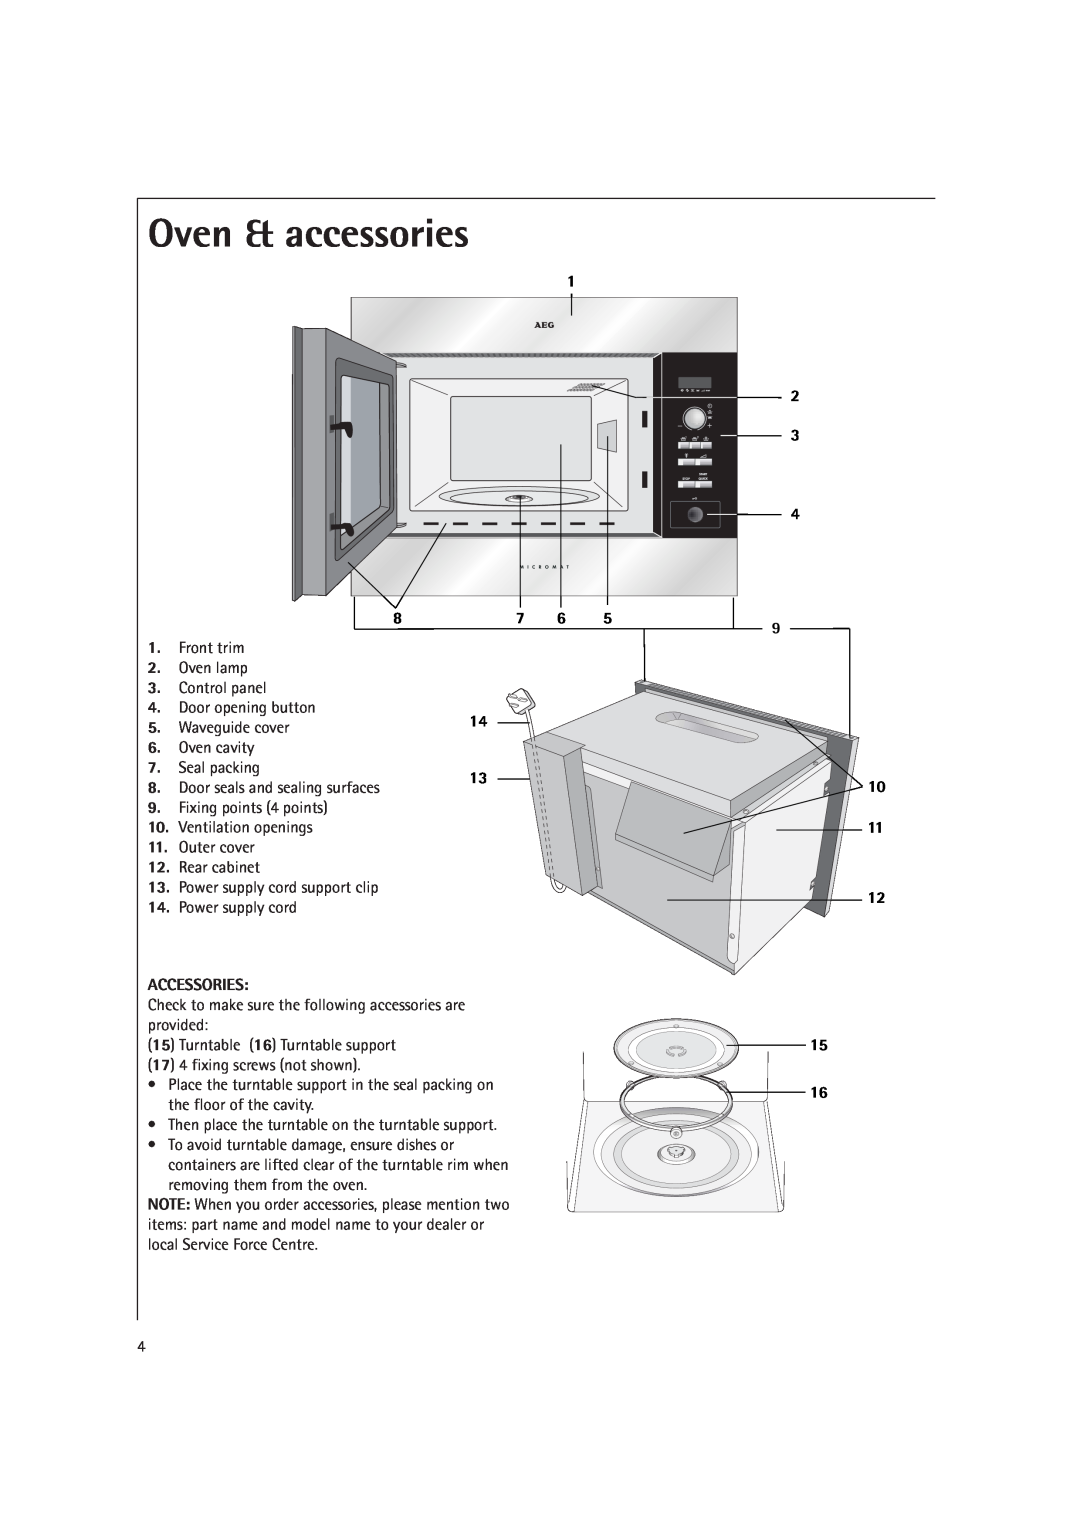 AEG MC2660E Oven & accessories, Door opening button, Waveguide cover, Oven cavity, Seal packing, Fixing points 4 points 